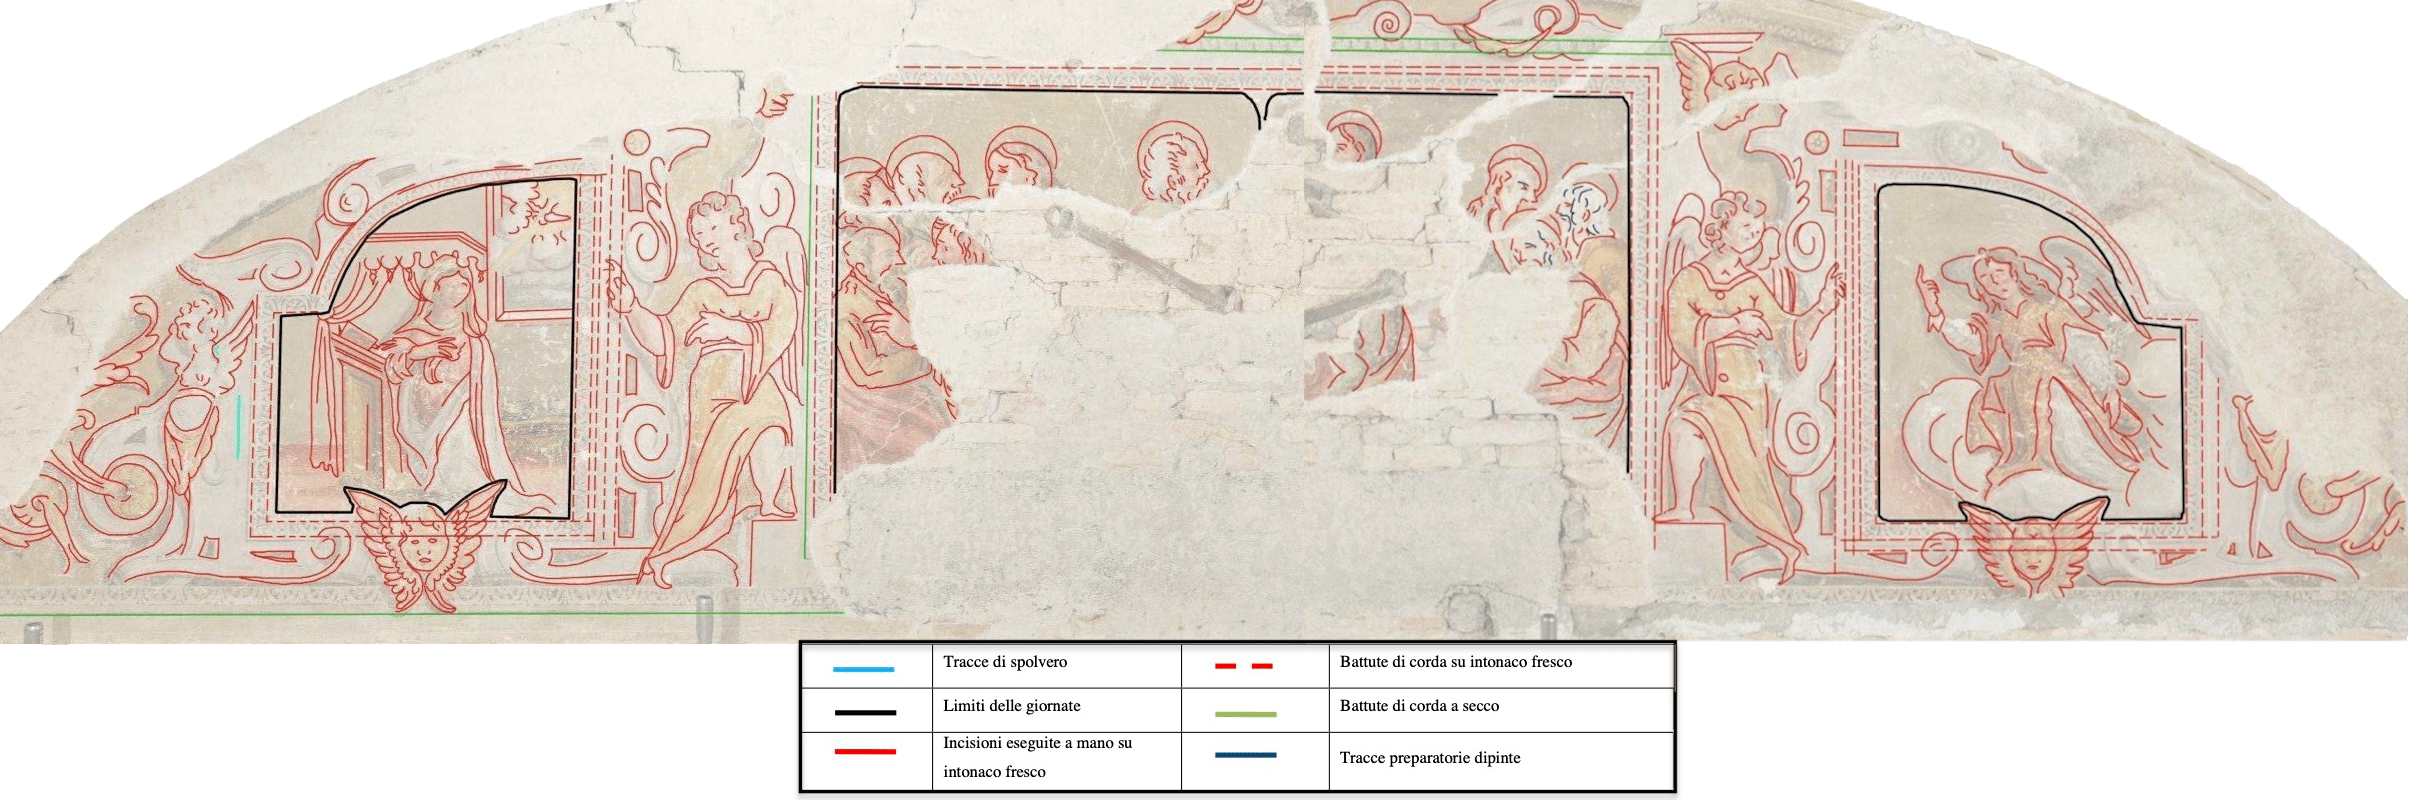 Reconstruction of the "days" used to create the fresco and of the different techniques used for the preparatory drawing on the plaster